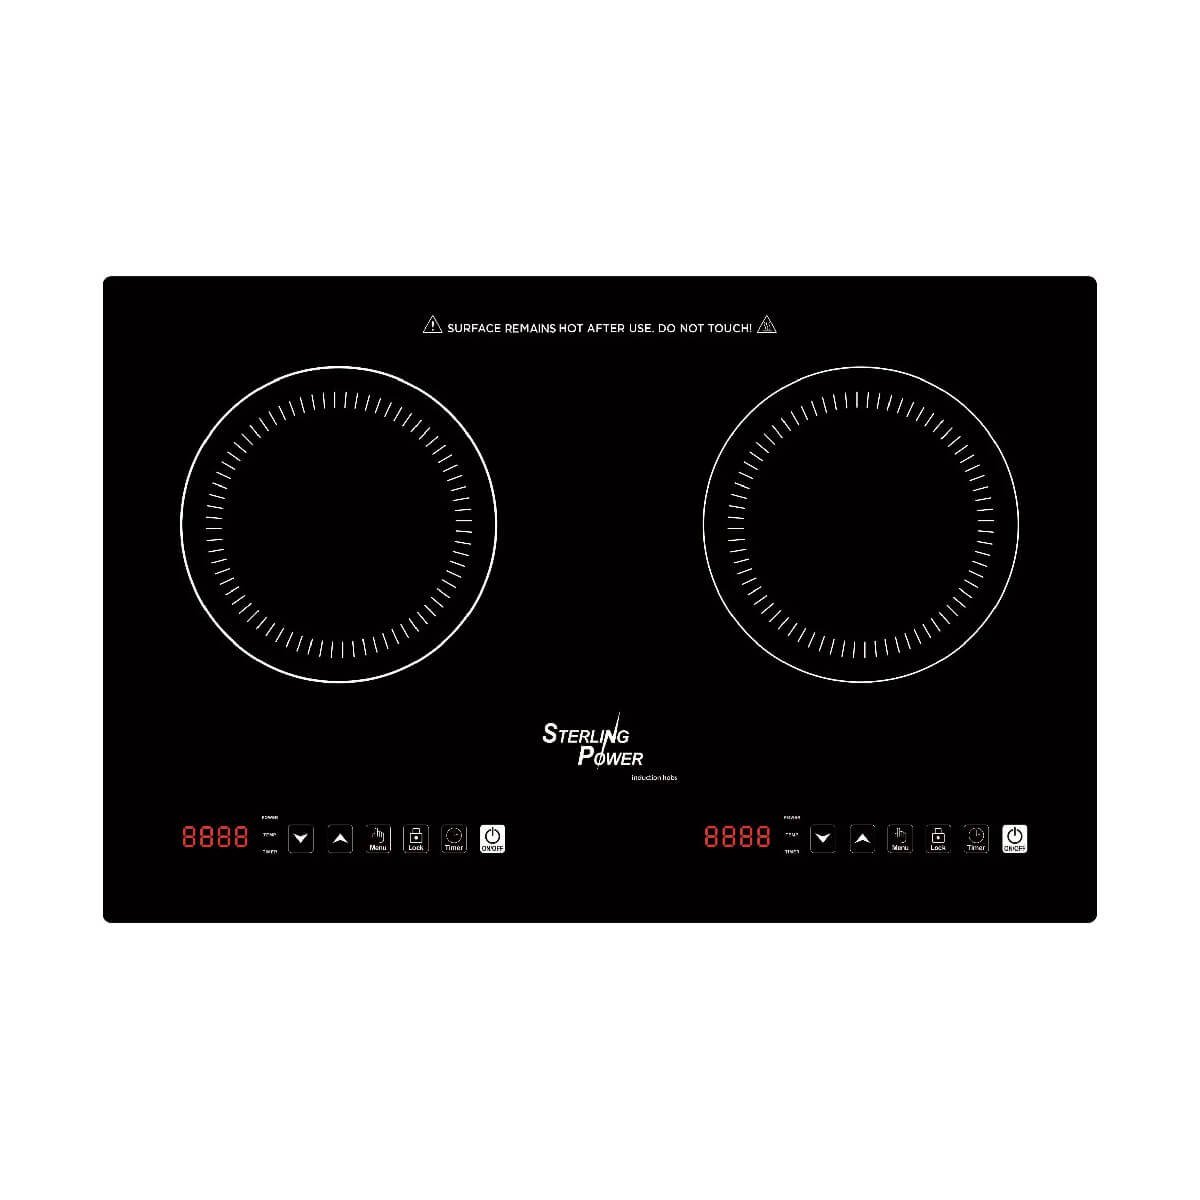 Black induction cooktop with two circular burners and a digital control panel in the front, labeled "Sterling Power Induction Hob - Fixed‚ Side-by-Side Twin Rings.